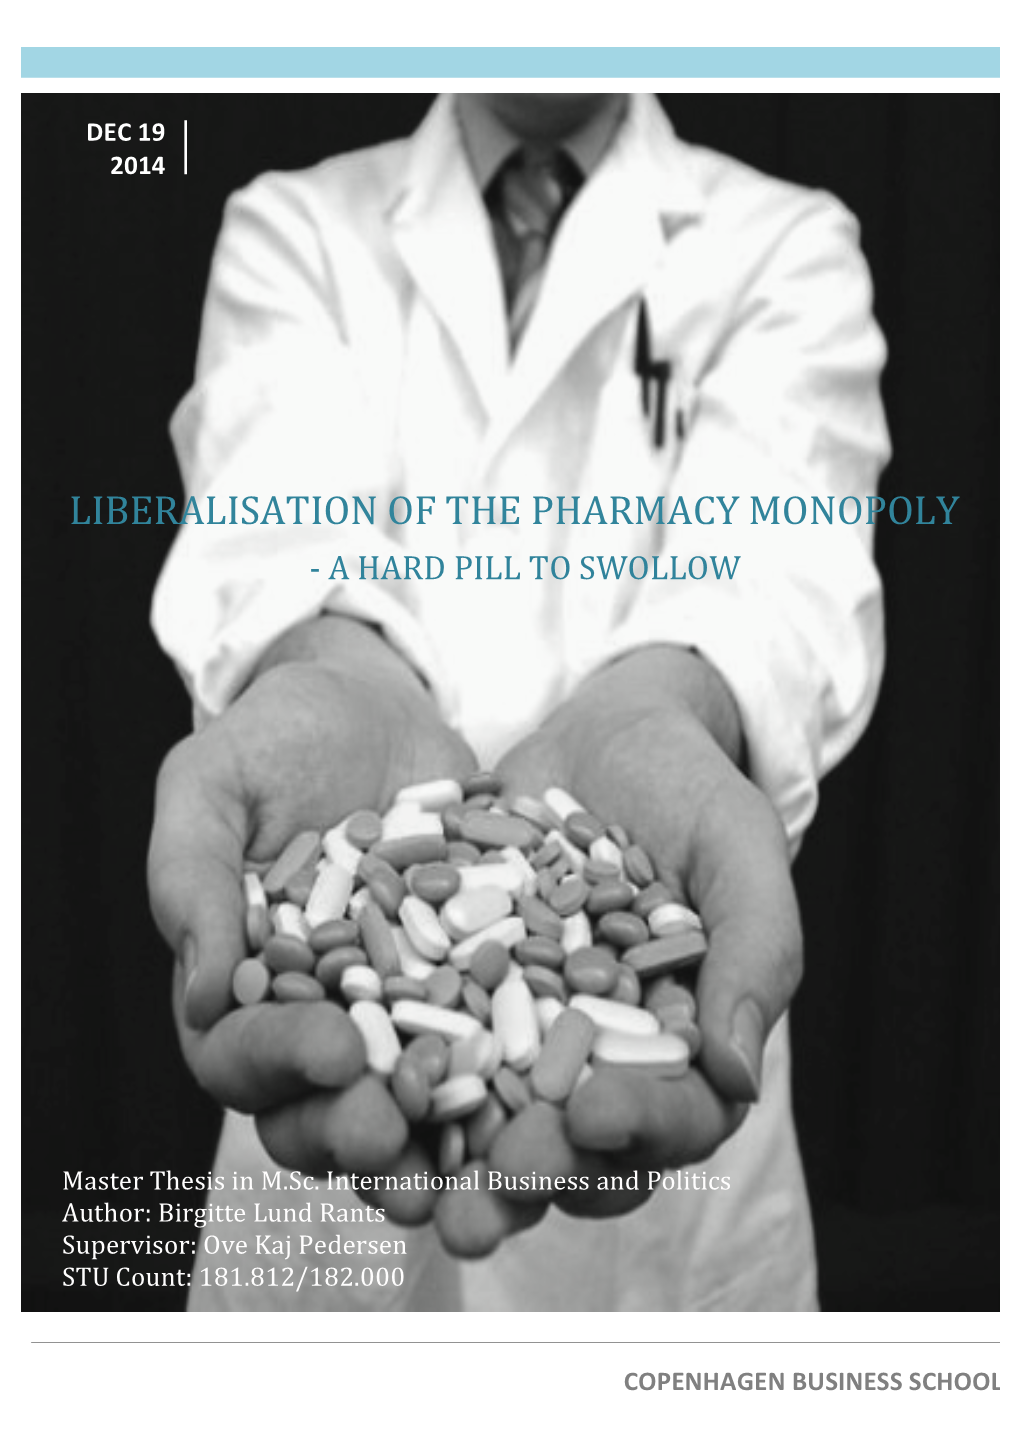 Liberalisation of the Pharmacy Monopoly - a Hard Pill to Swollow